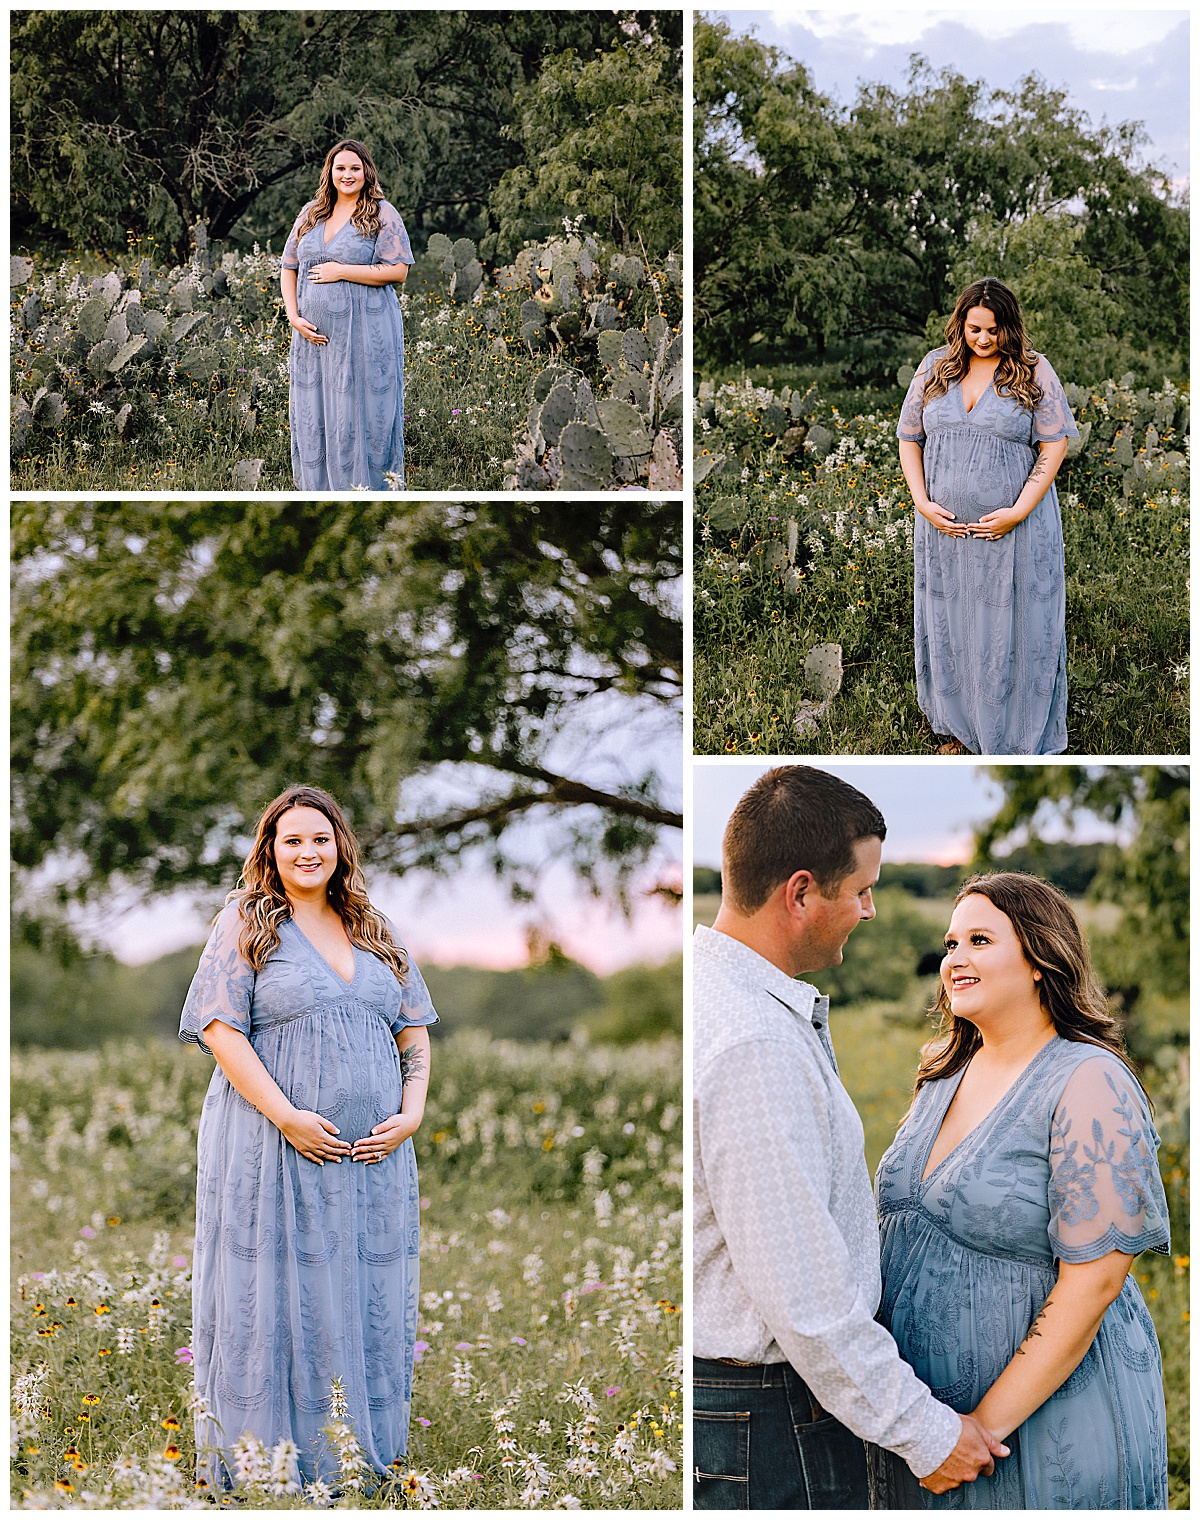 Rustic-Maternity-Session-Texas-Sunset-Carly-Barton-Photography_0074.jpg